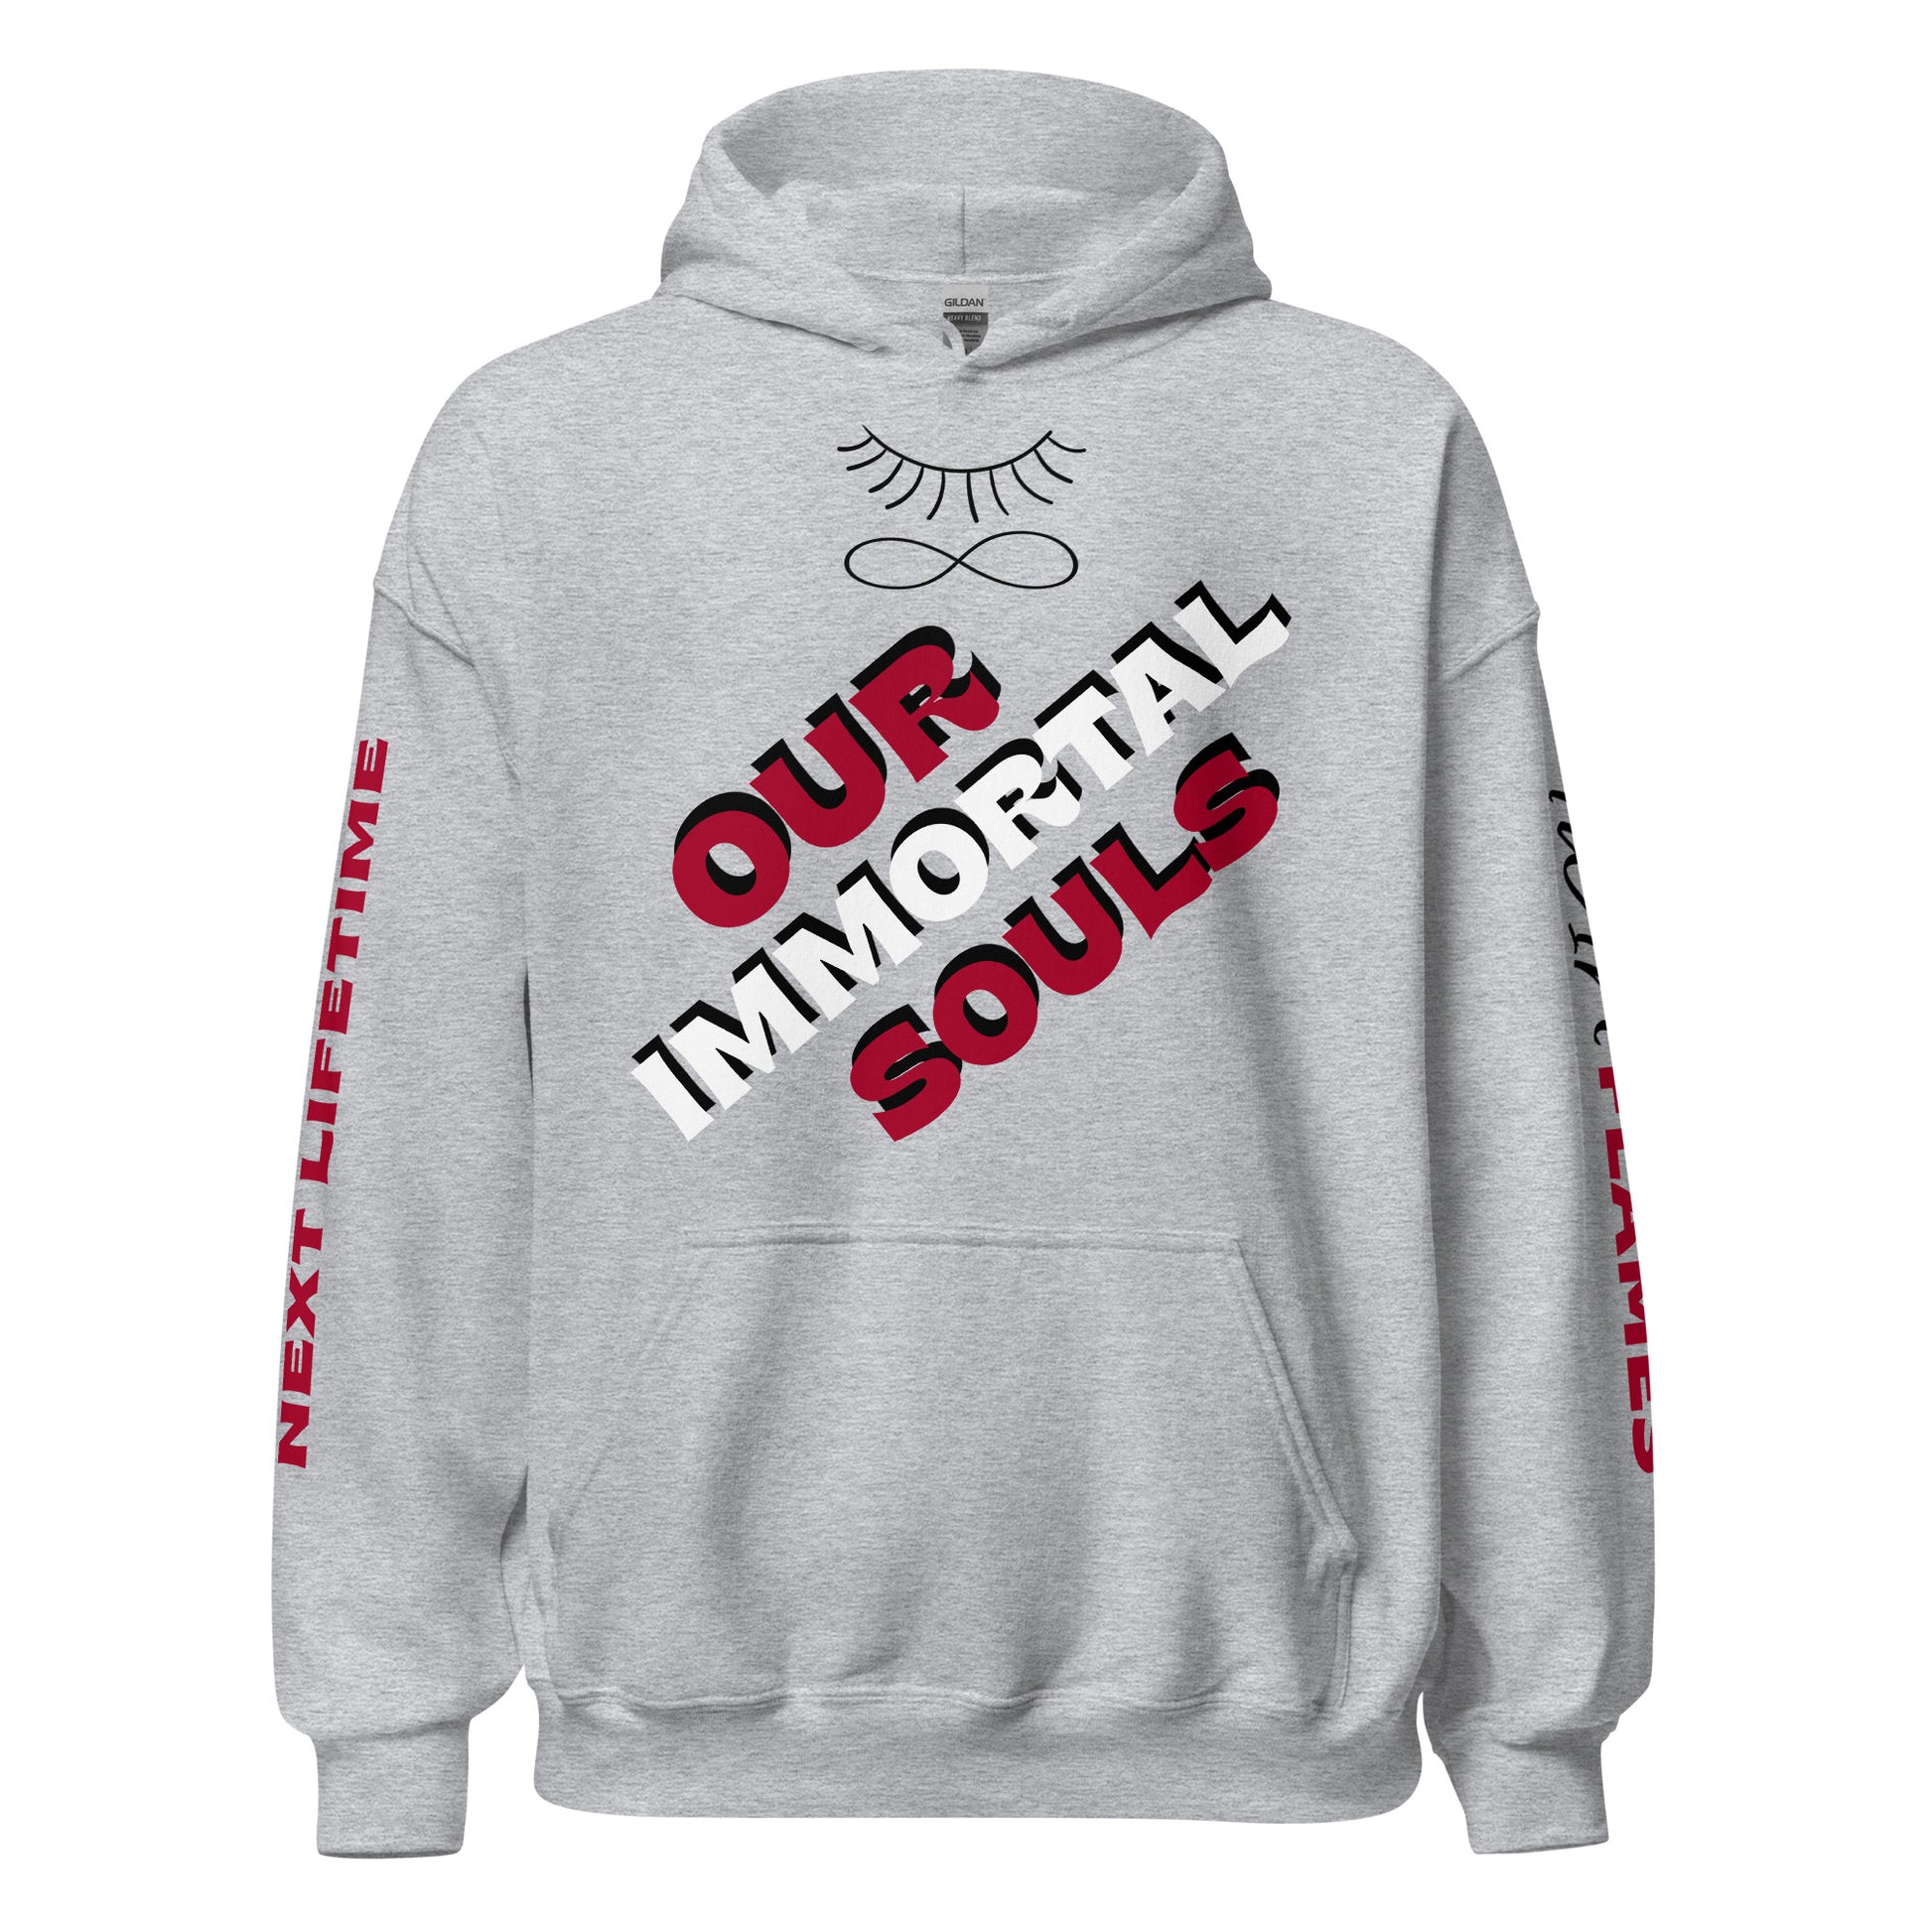 Gildan unisex hoodies for men and for women. Sport grey graphic hoodies with designs on the front, back, and sleeves. Black closed eye and infinity symbol logo with red, white, and black text "Our Immortal Souls" spiritual mantra on the front. It has a double-lined hood, matching drawcords, front pouch pocket, and rib-knit cuffs. Made from 50% preshrunk cotton and 50% polyester. Sizes Small, Medium, Large, Extra Large, 2X, 3X, 4X, and 5X. JAMILLIAH'S WISDOM IS TIMELESS SHOP - wisdomistimeless.com.